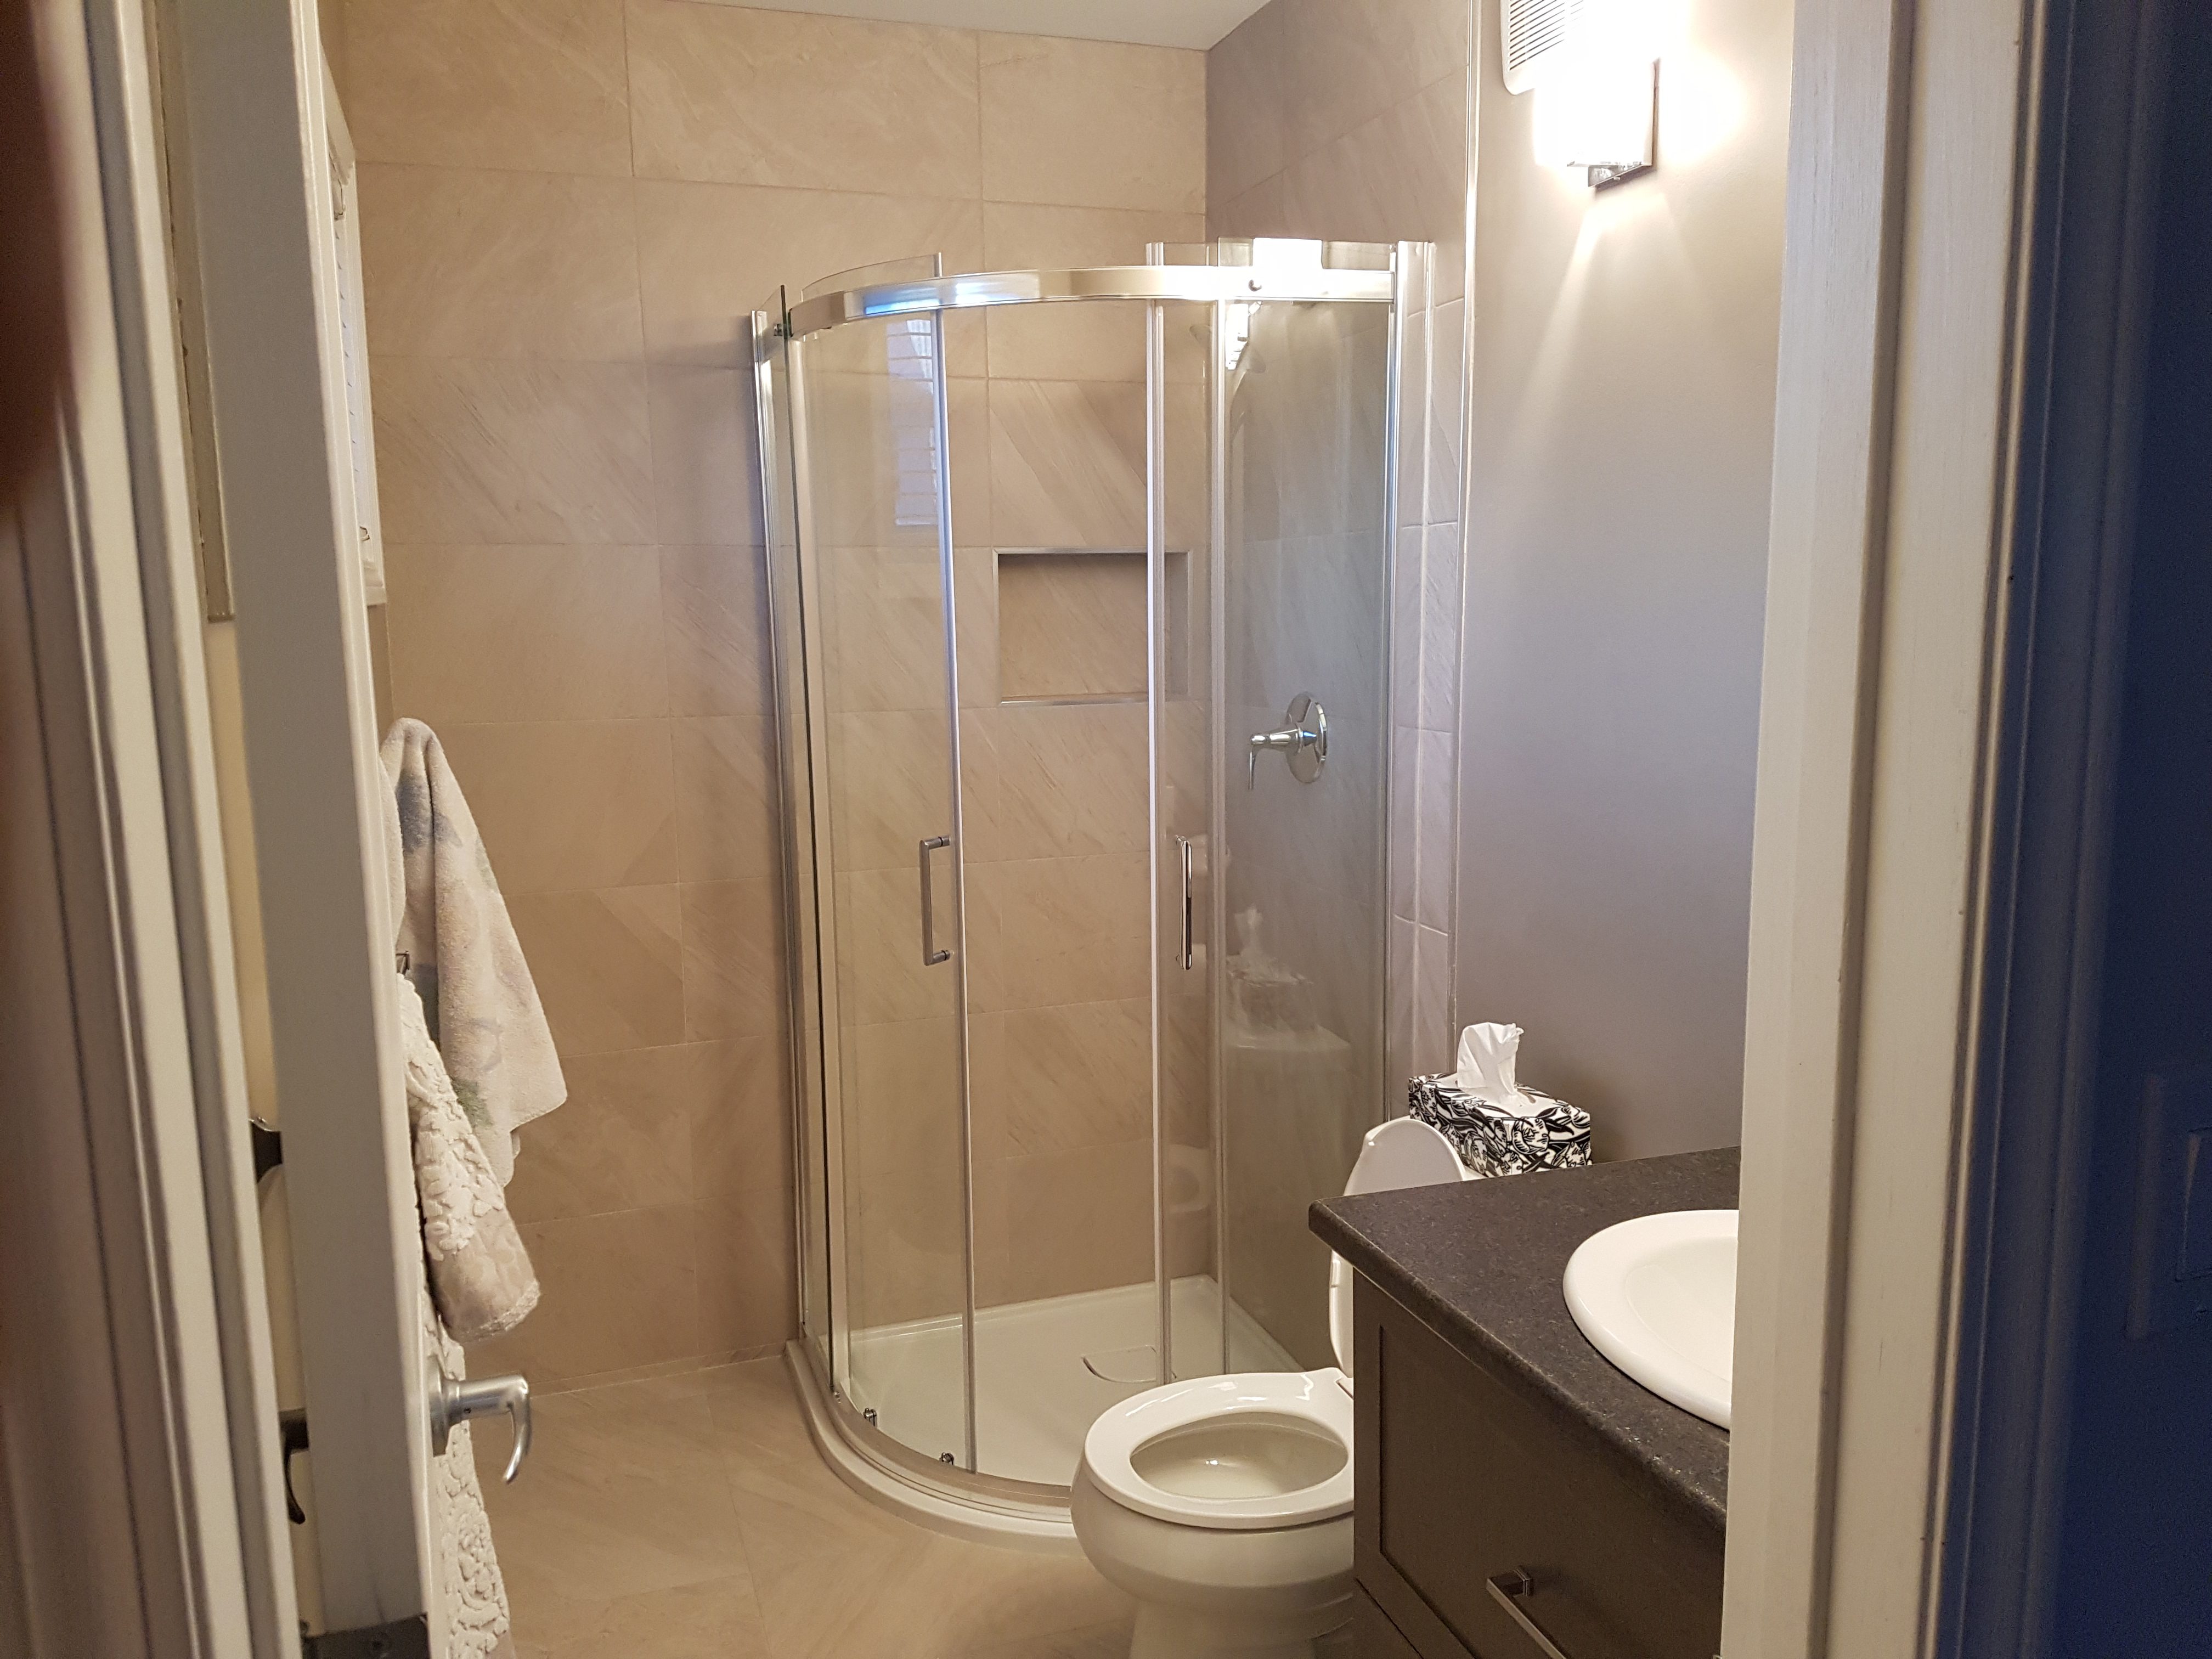 Bathroom renovation with a curved shower area